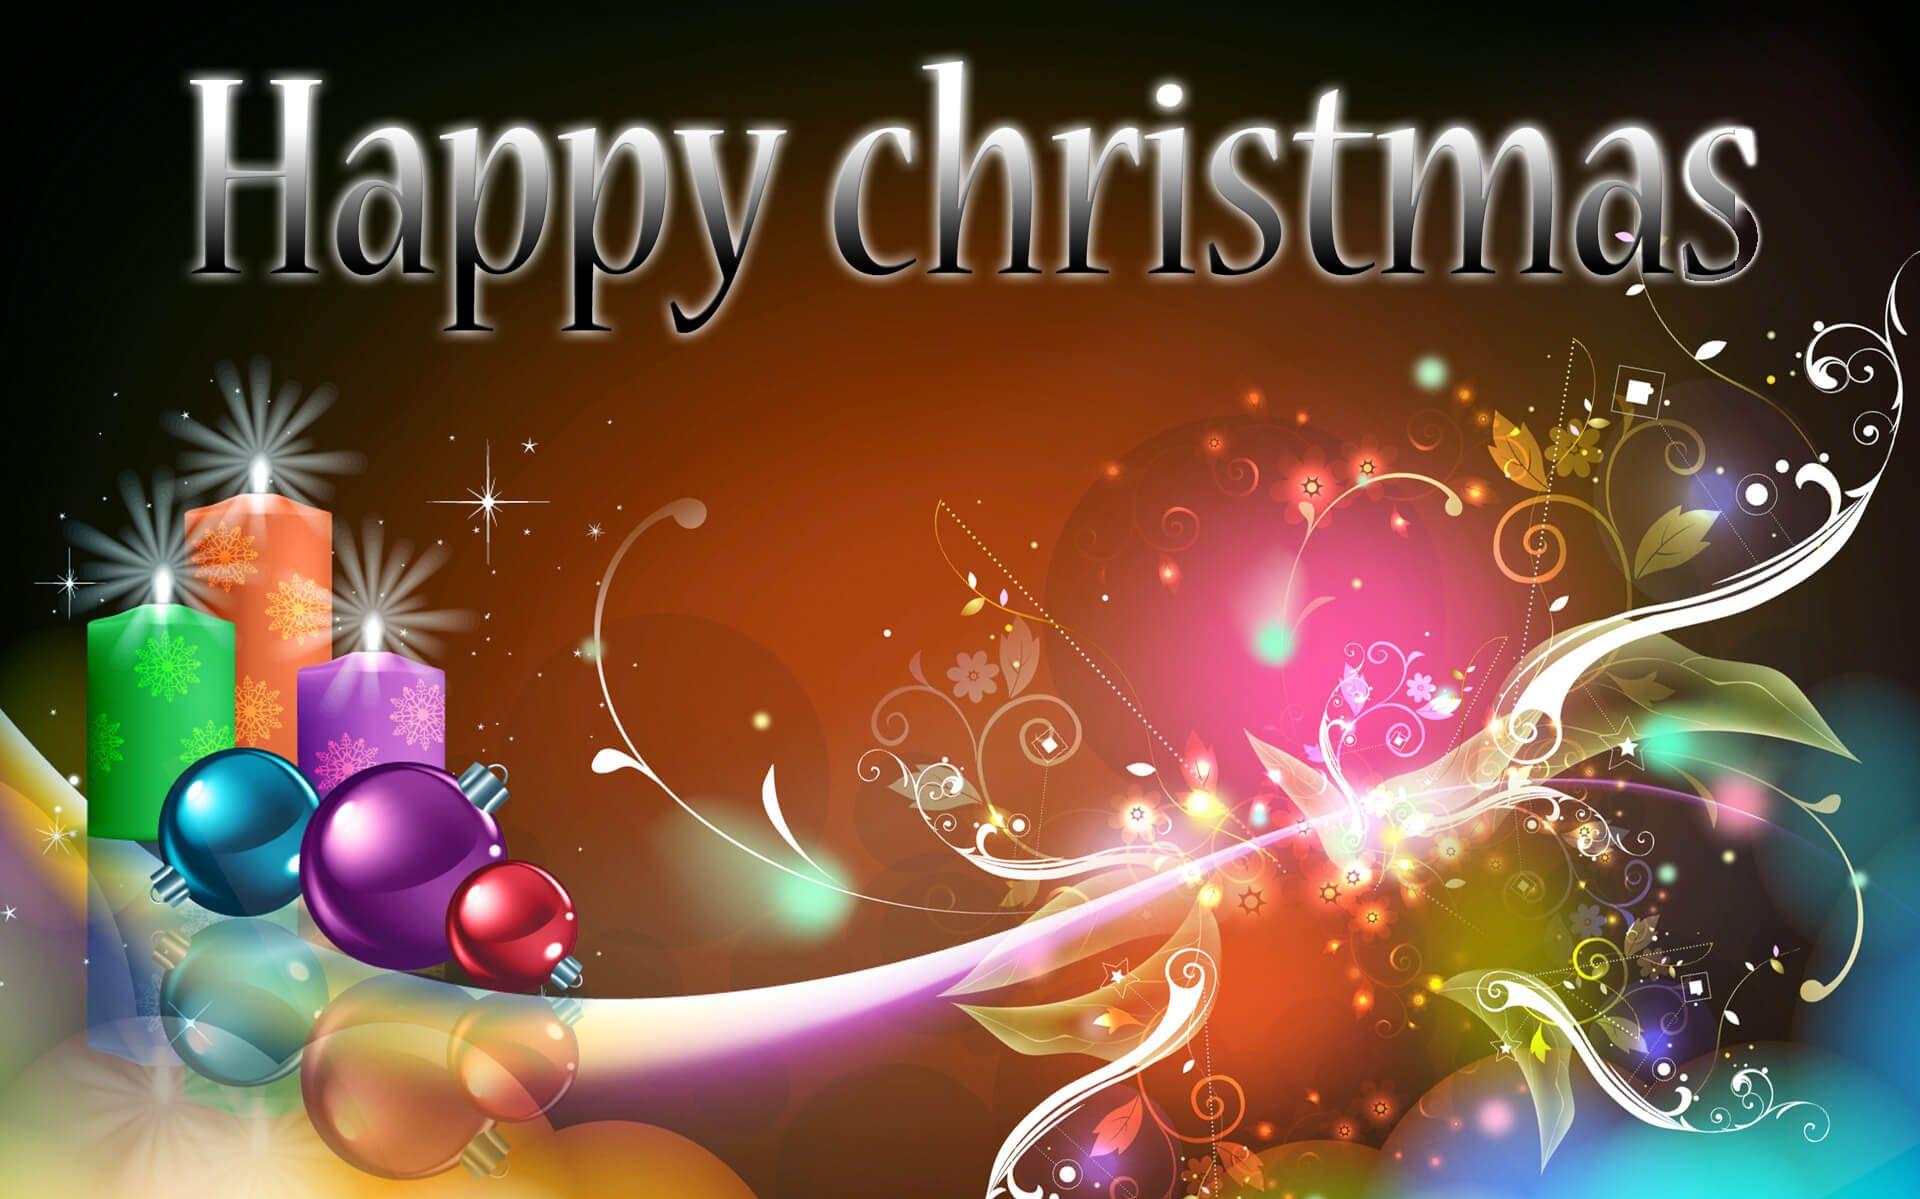 Happy Christmas Day Images Celebration Download Happy christmas